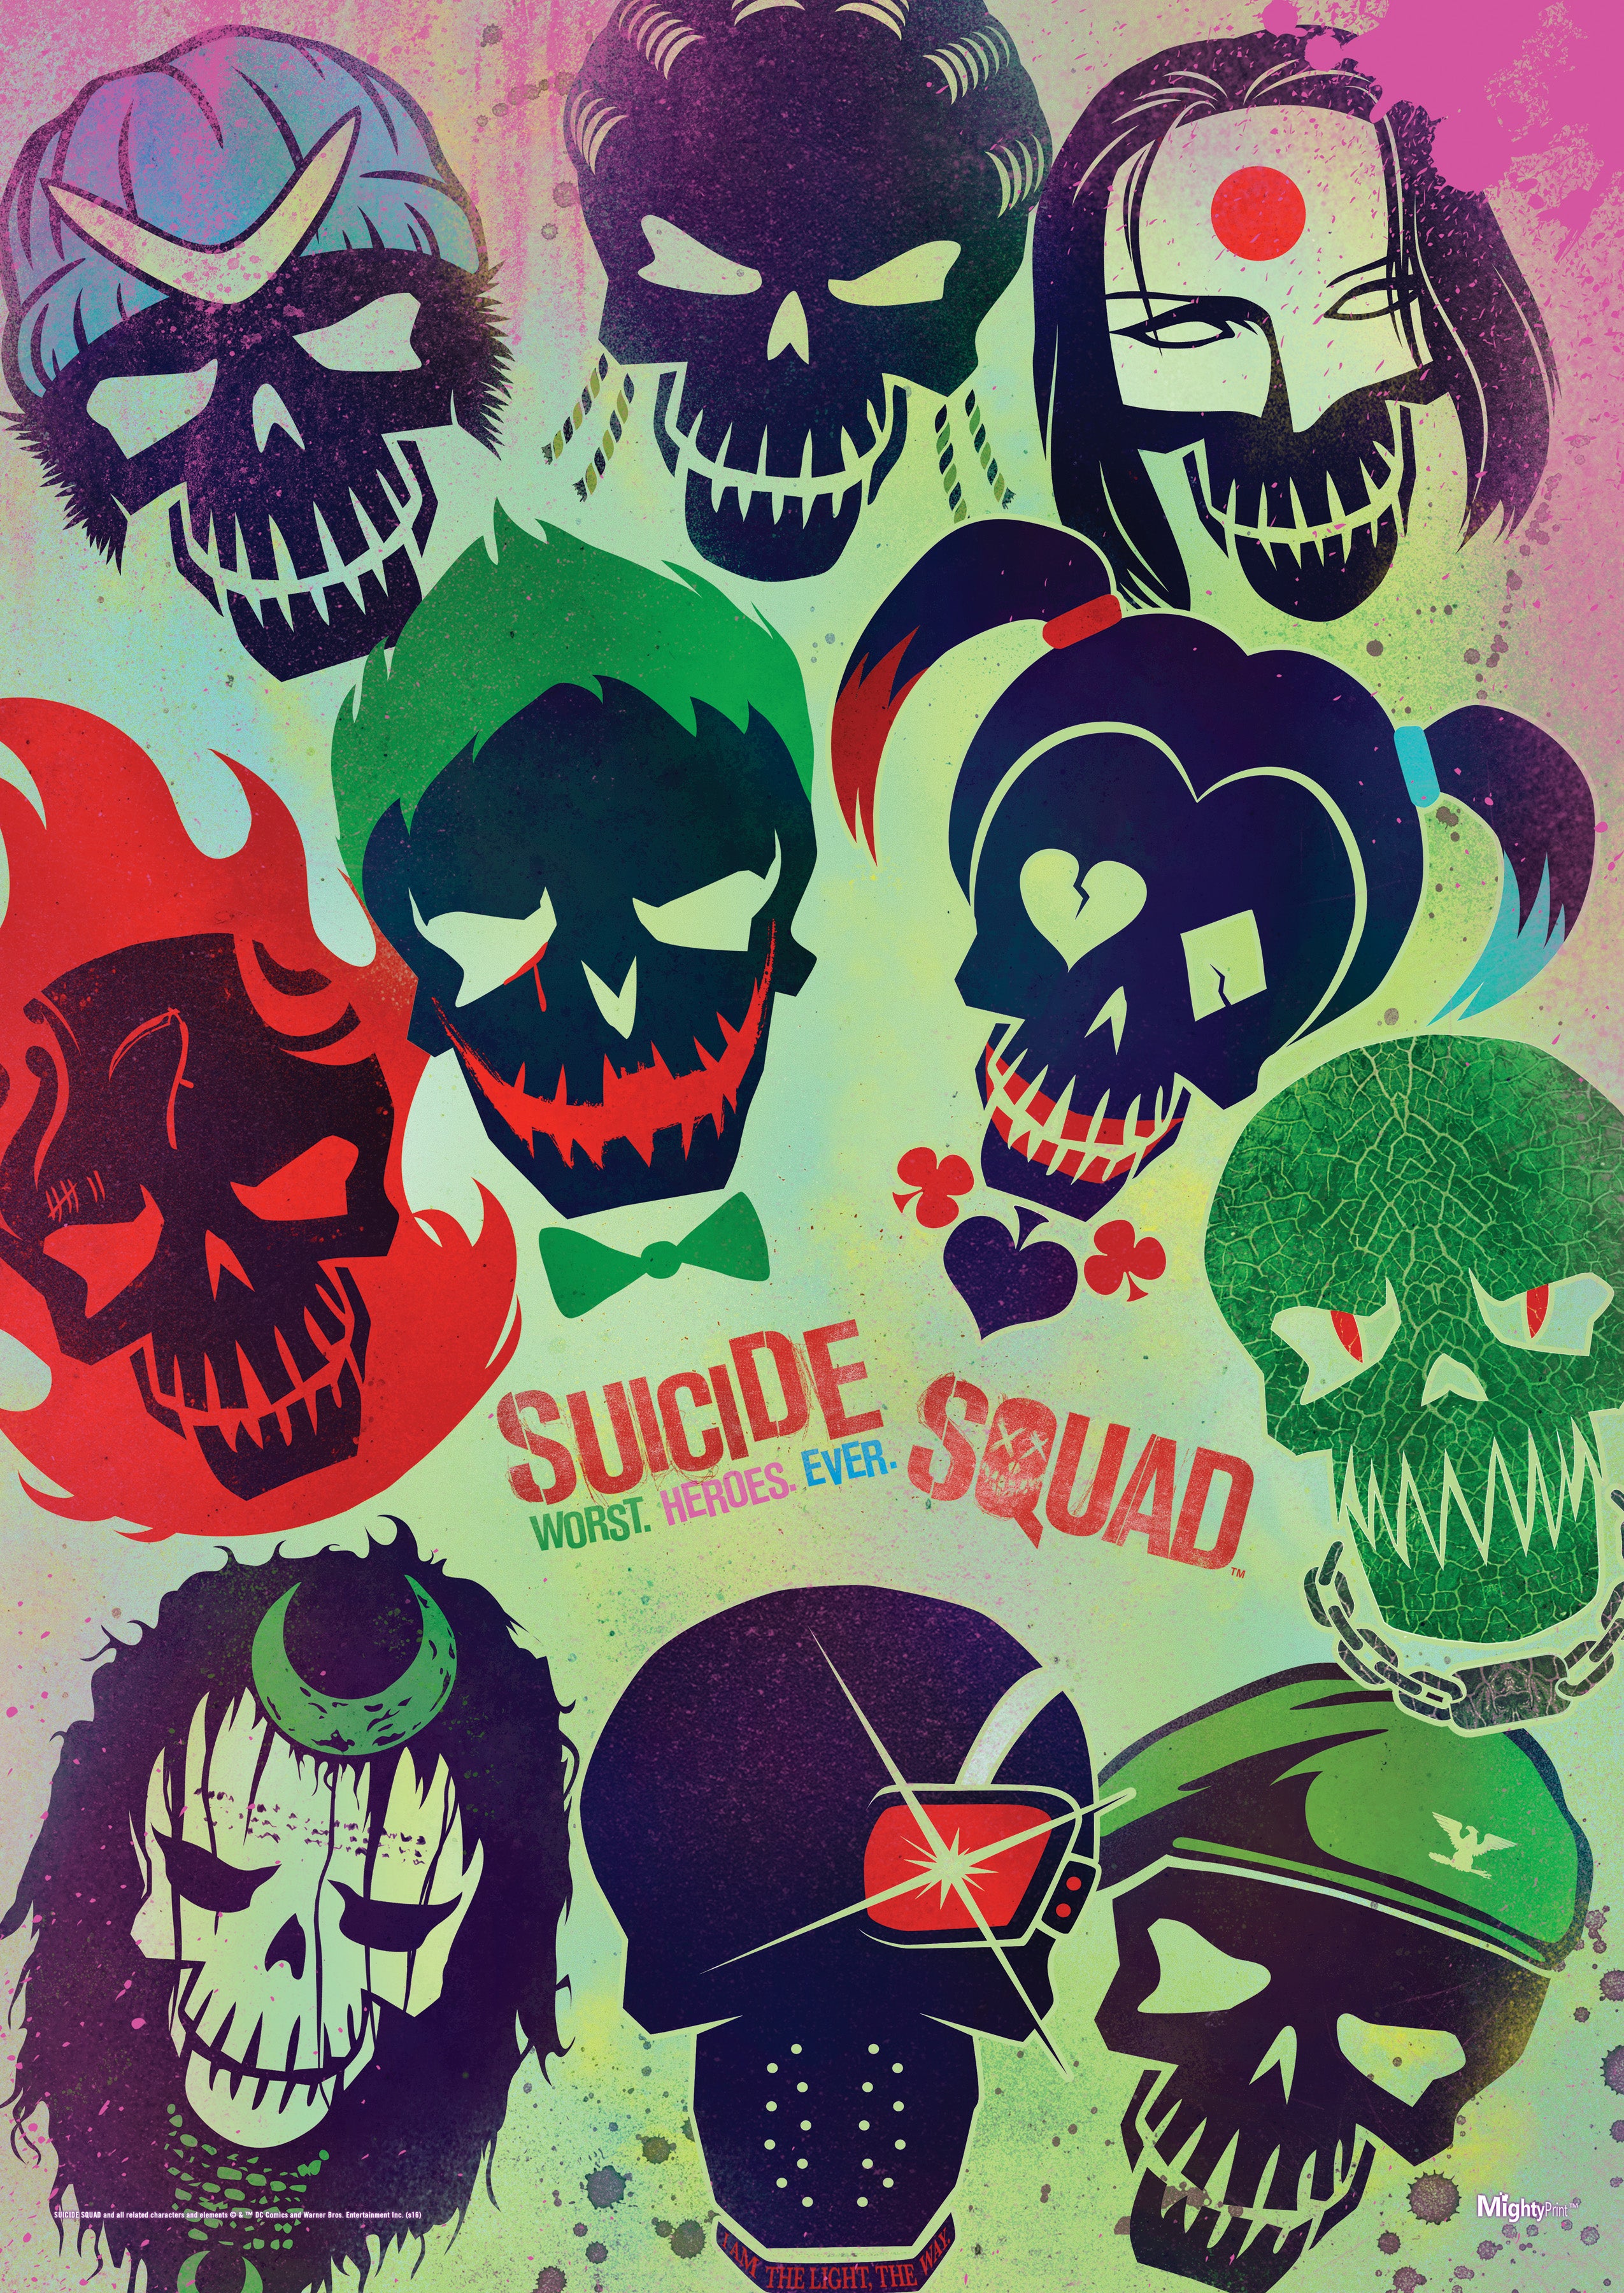 Suicide Squad (Worst Heroes Ever) MightyPrint™ Wall Art MP17240219